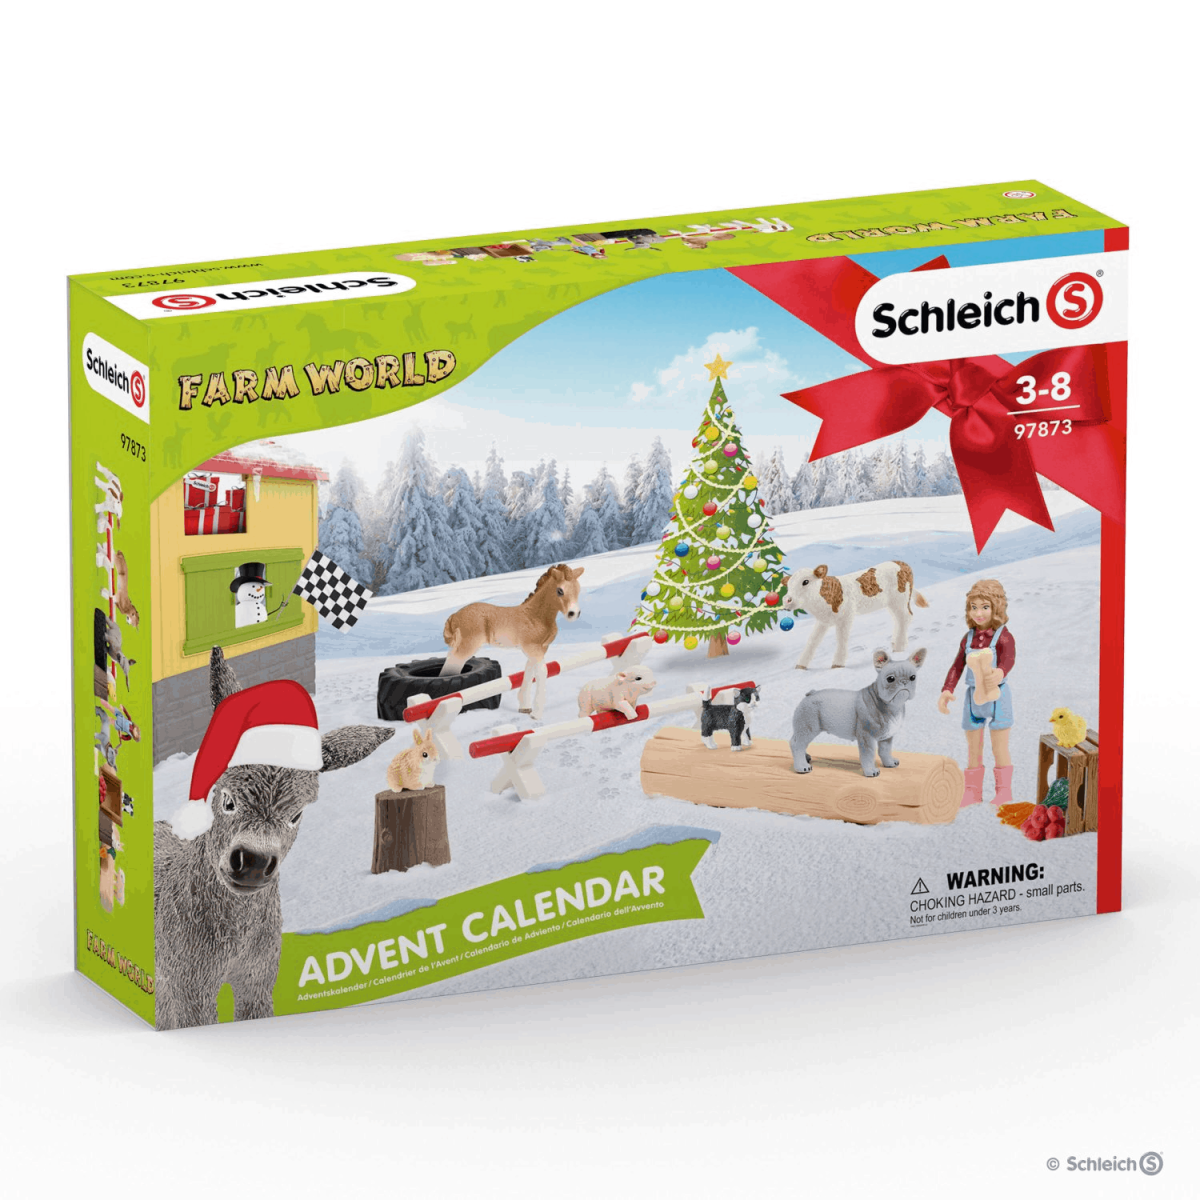 Schleich Advent Calendars 2019 Available Now! - Hello Subscription